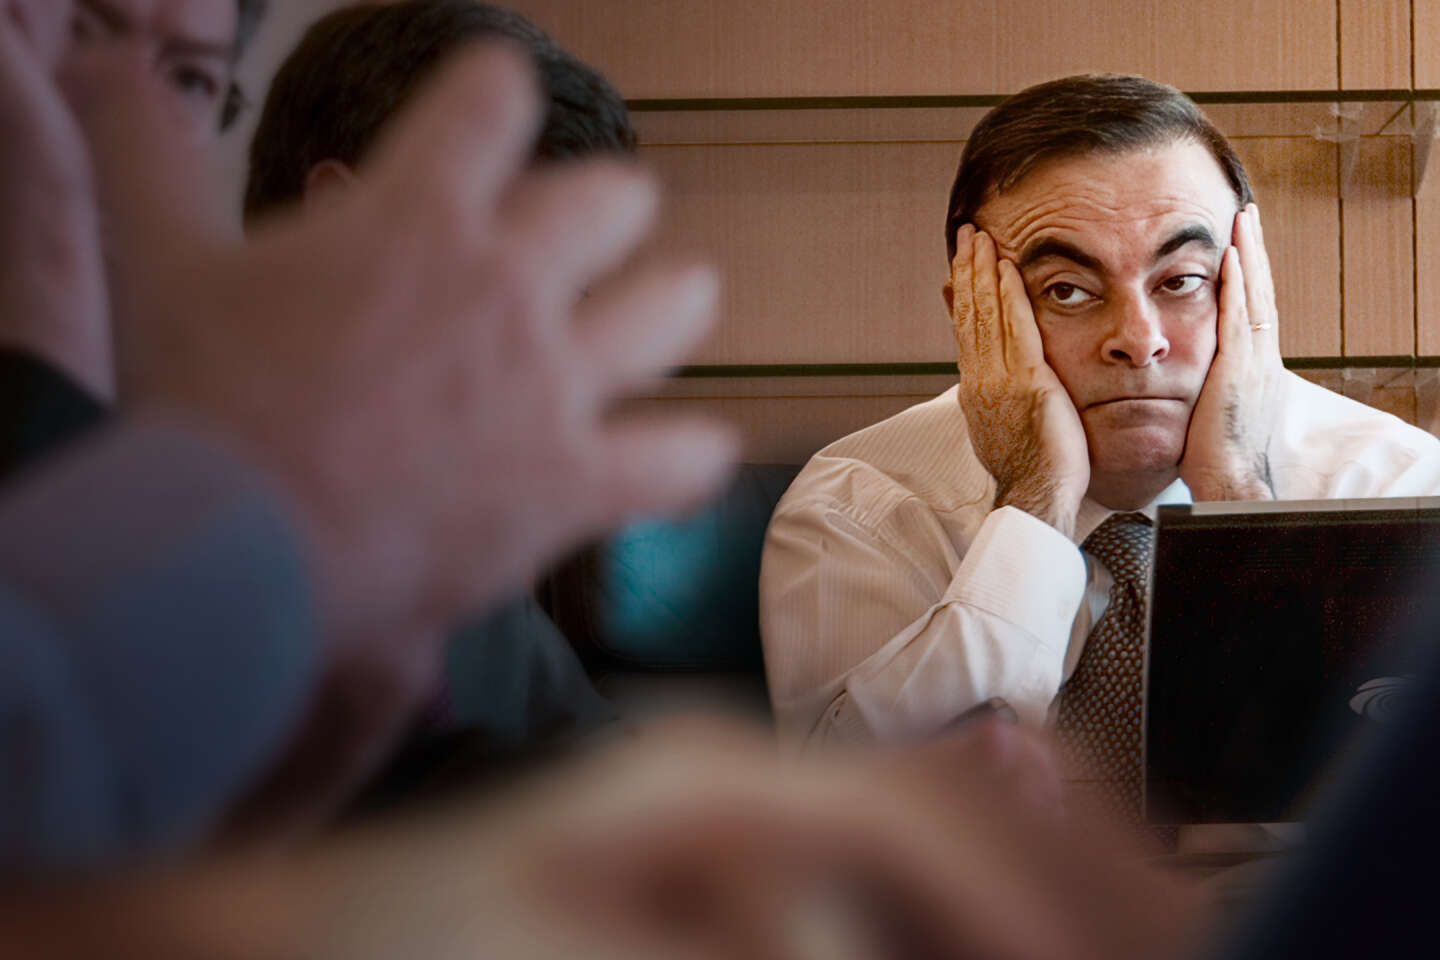 Fugitive: The Curious Case of Carlos Ghosn:' A documentary in the shape of a  thriller